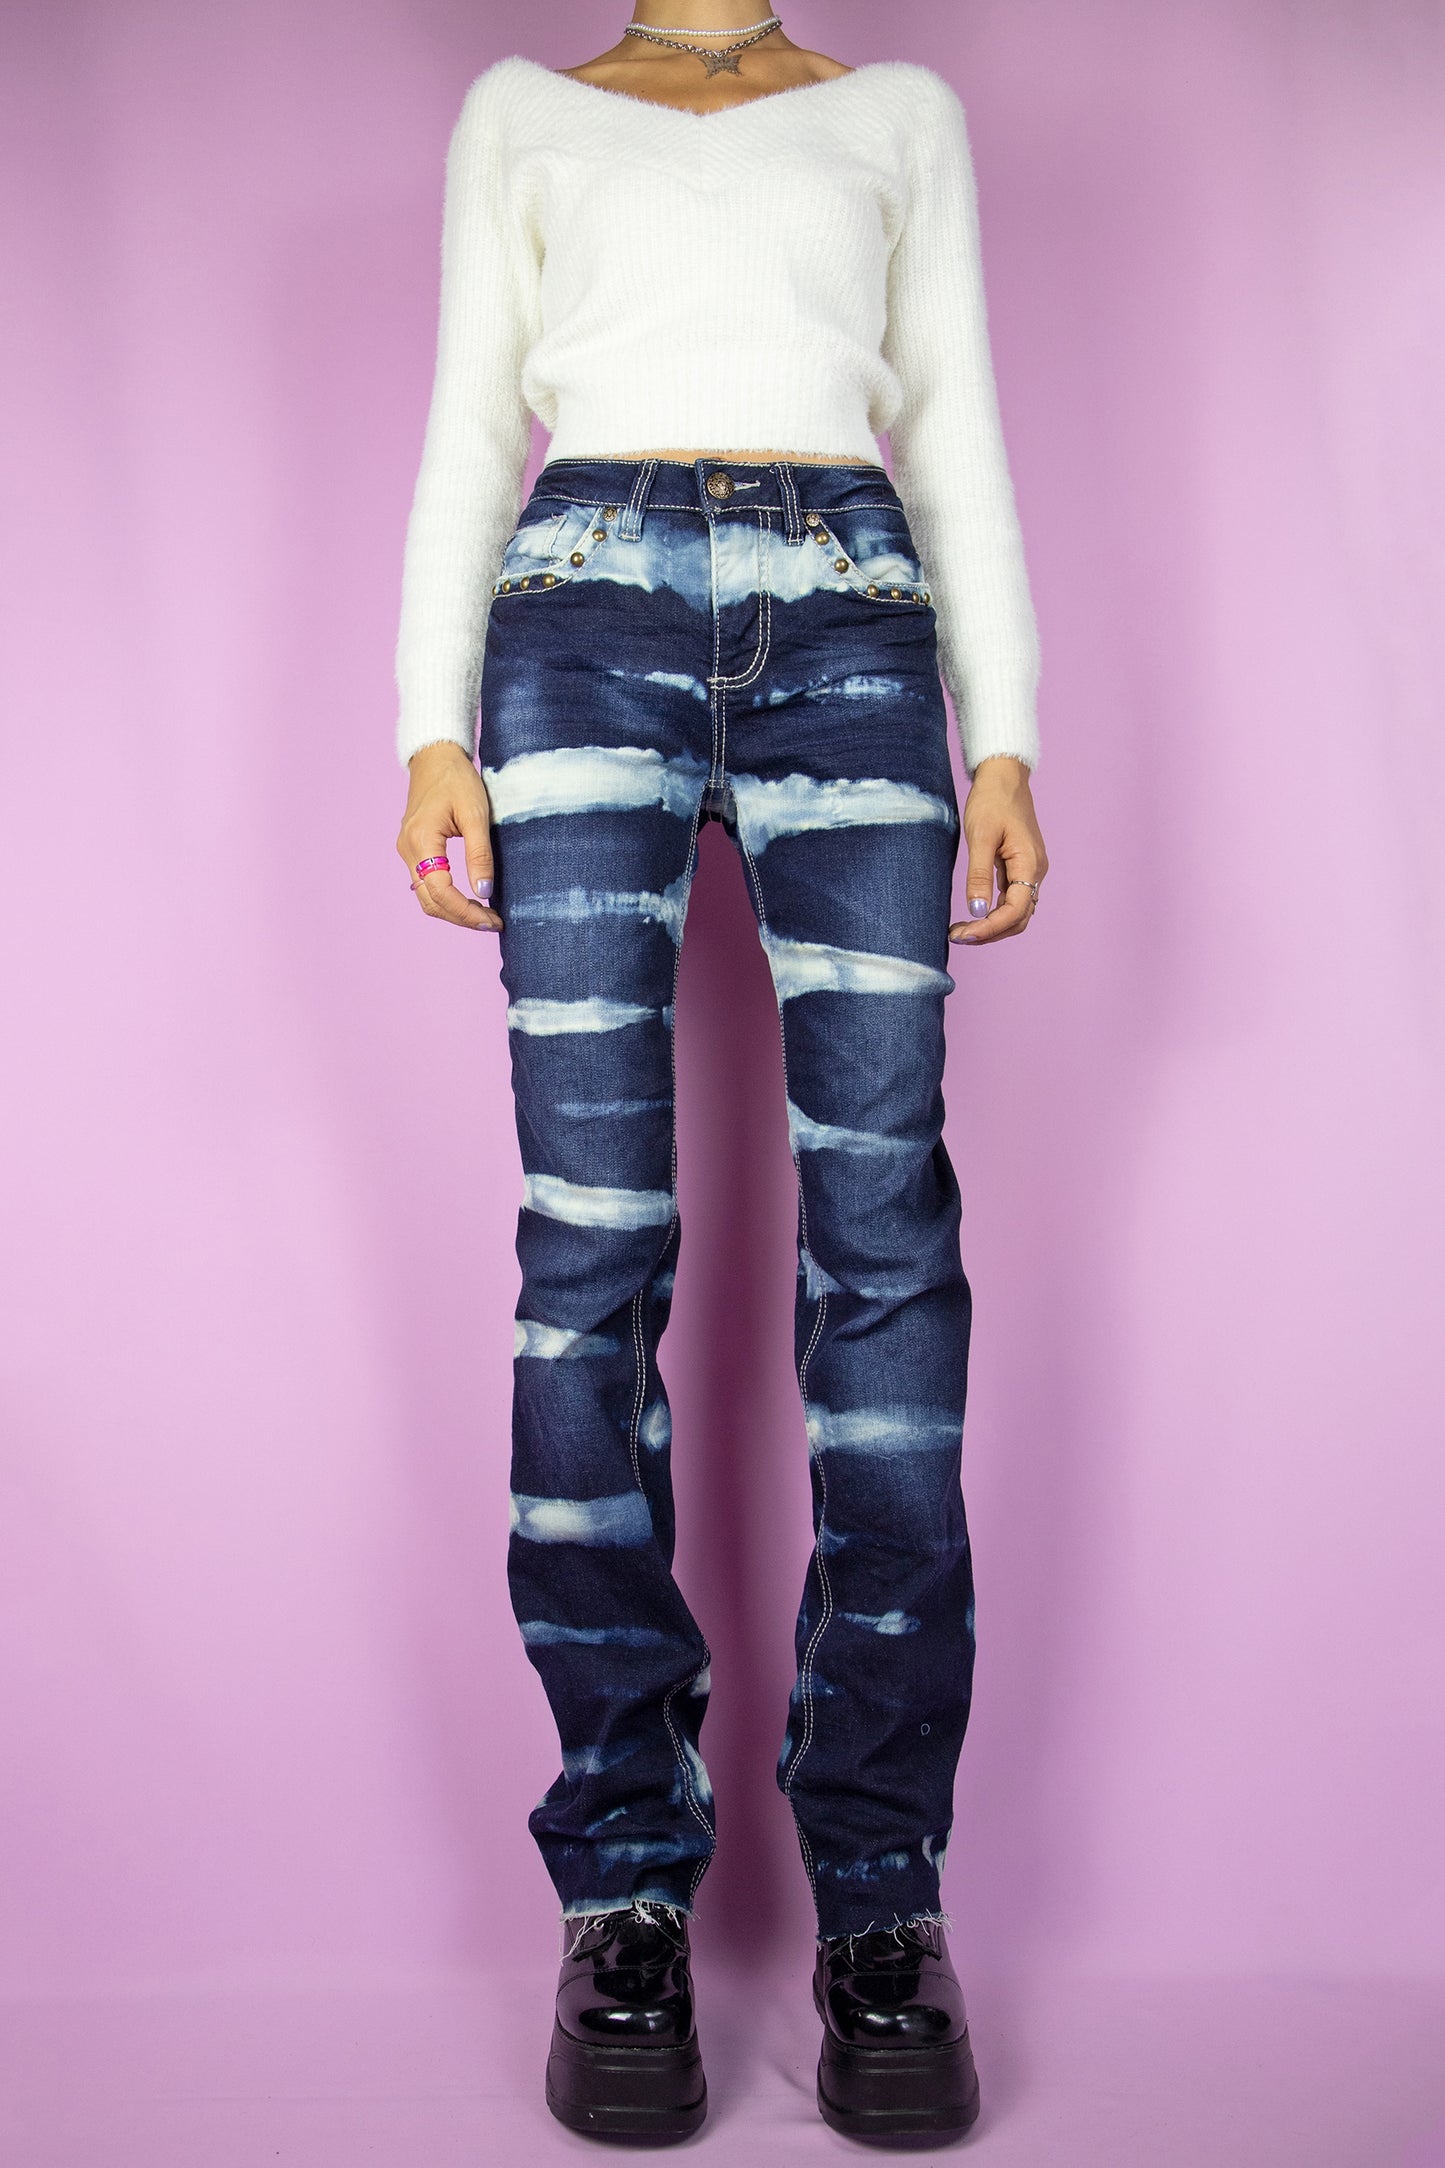 The Vintage Y2K Striped Bleach Jeans are straight stretch denim pants adorned with bleached stripes, featuring pockets and a raw hem. These iconic millennium cyber custom jeans from the 2000s are the perfect choice for festivals, raves, and clubbing.